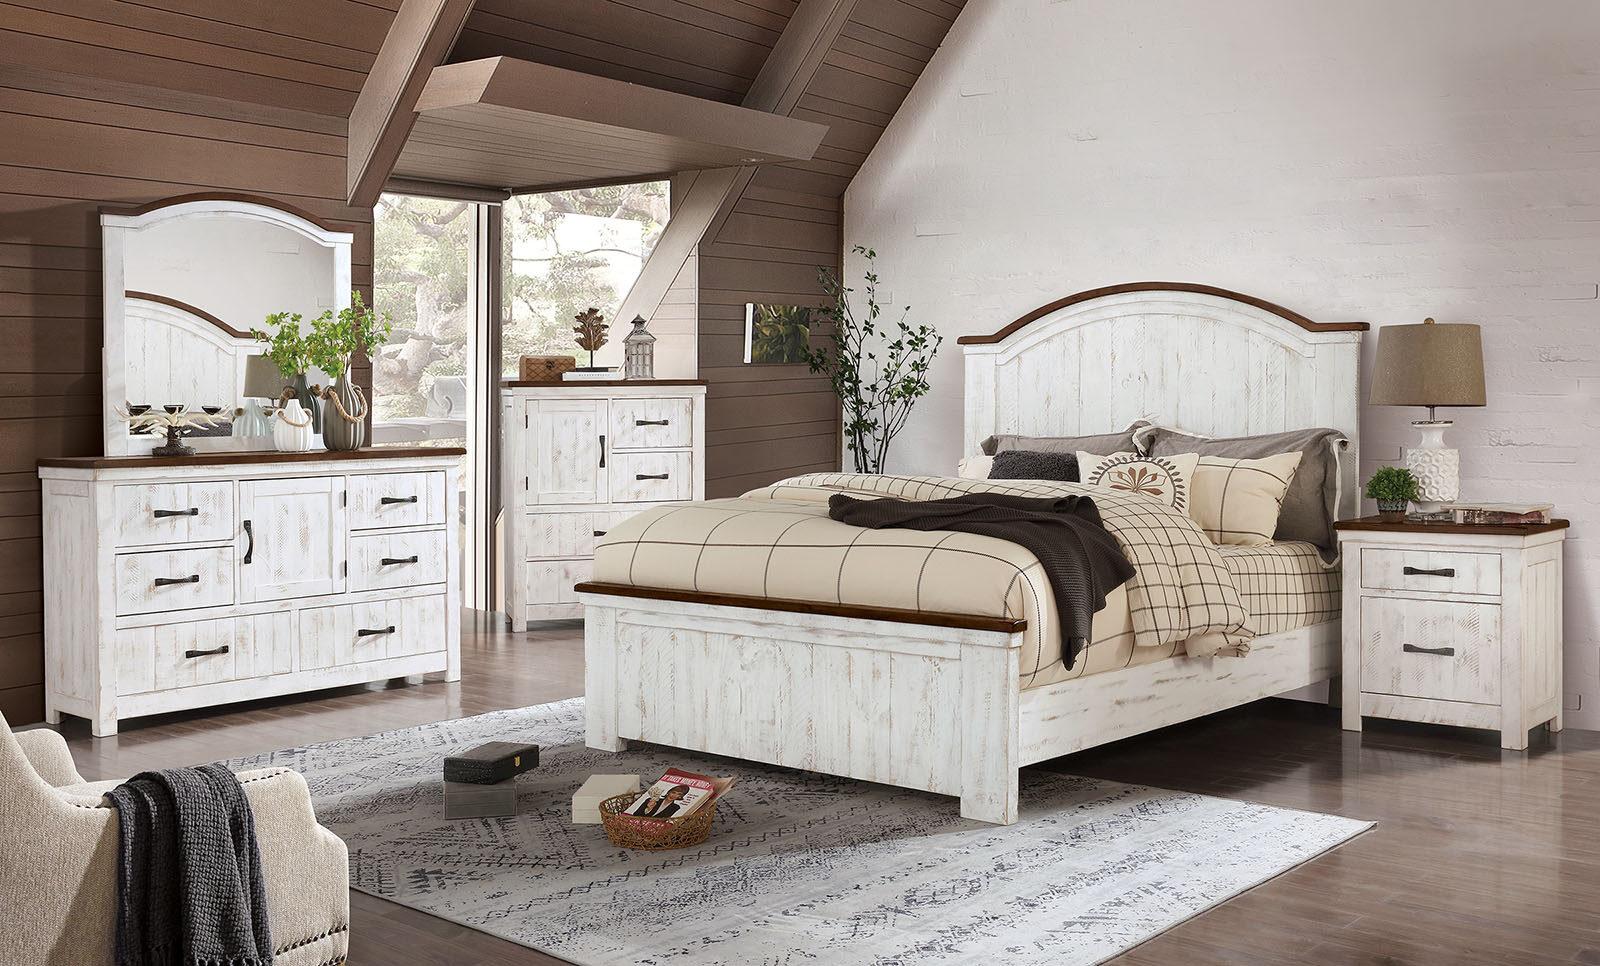 

    
Transitional Distressed White & Walnut Solid Wood Queen Bedroom Set 5pcs Furniture of America CM7962 Alyson
